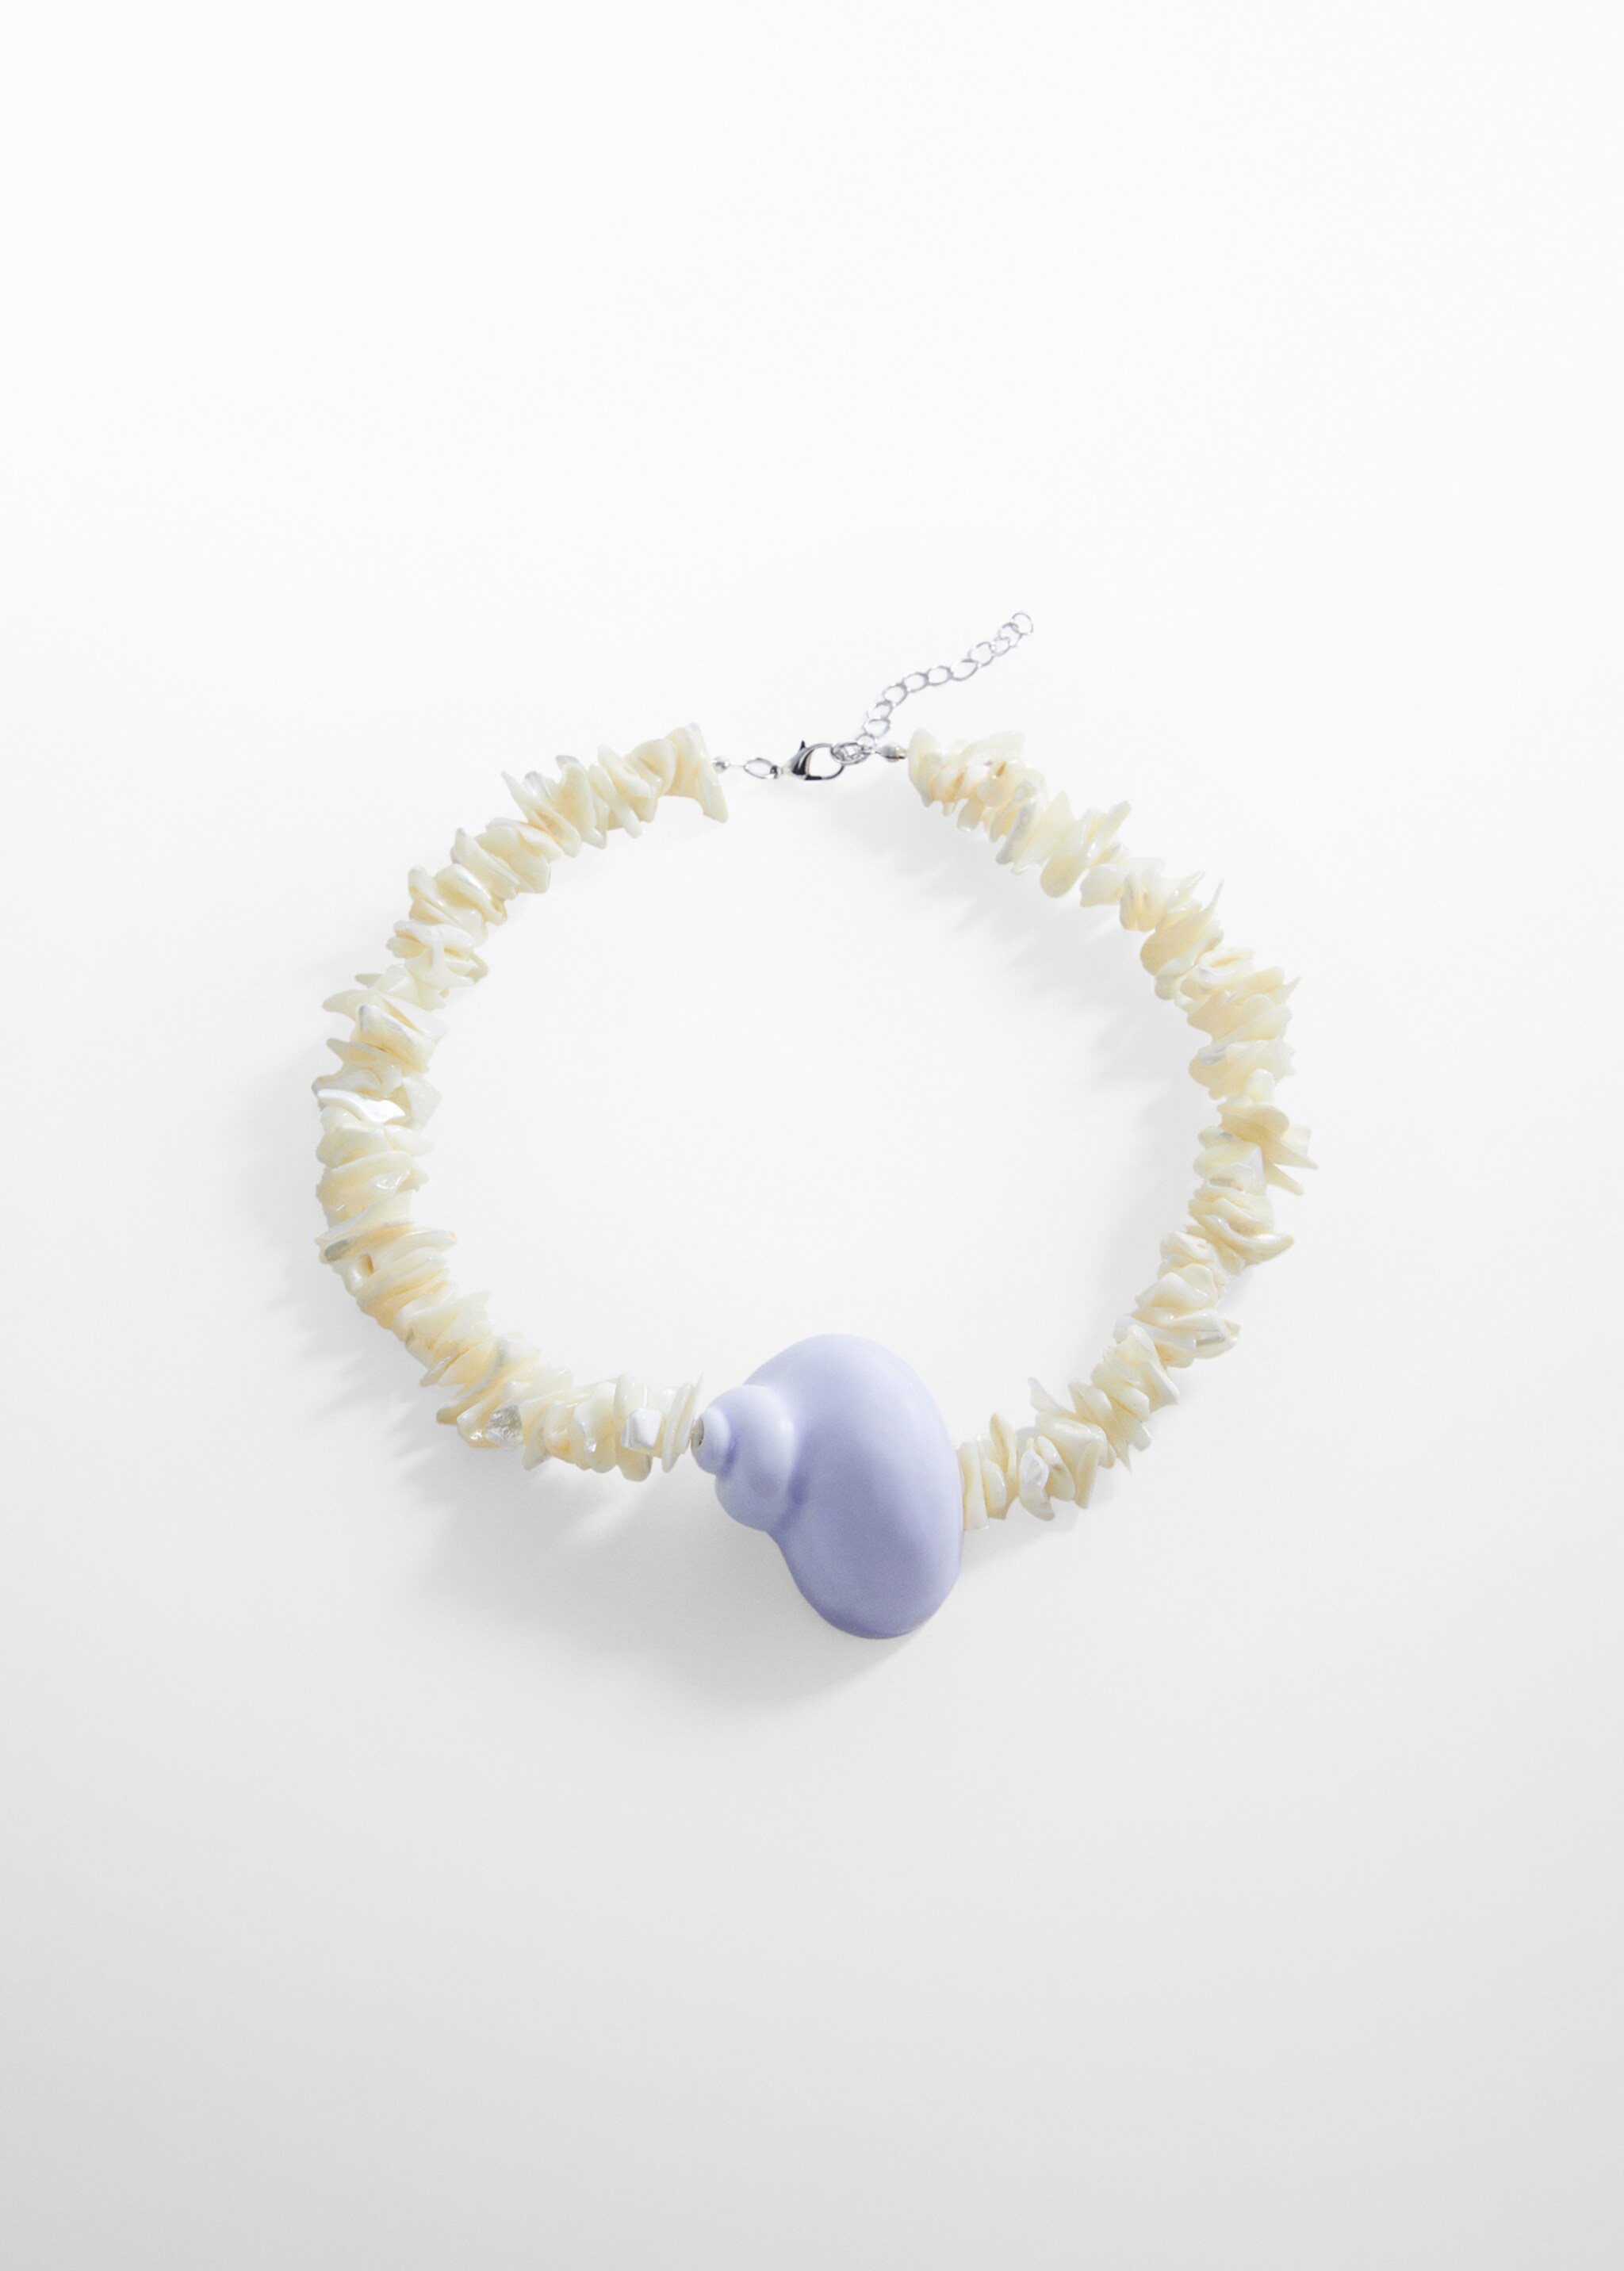 Shell necklace with mother-of-pearl beads - Article without model